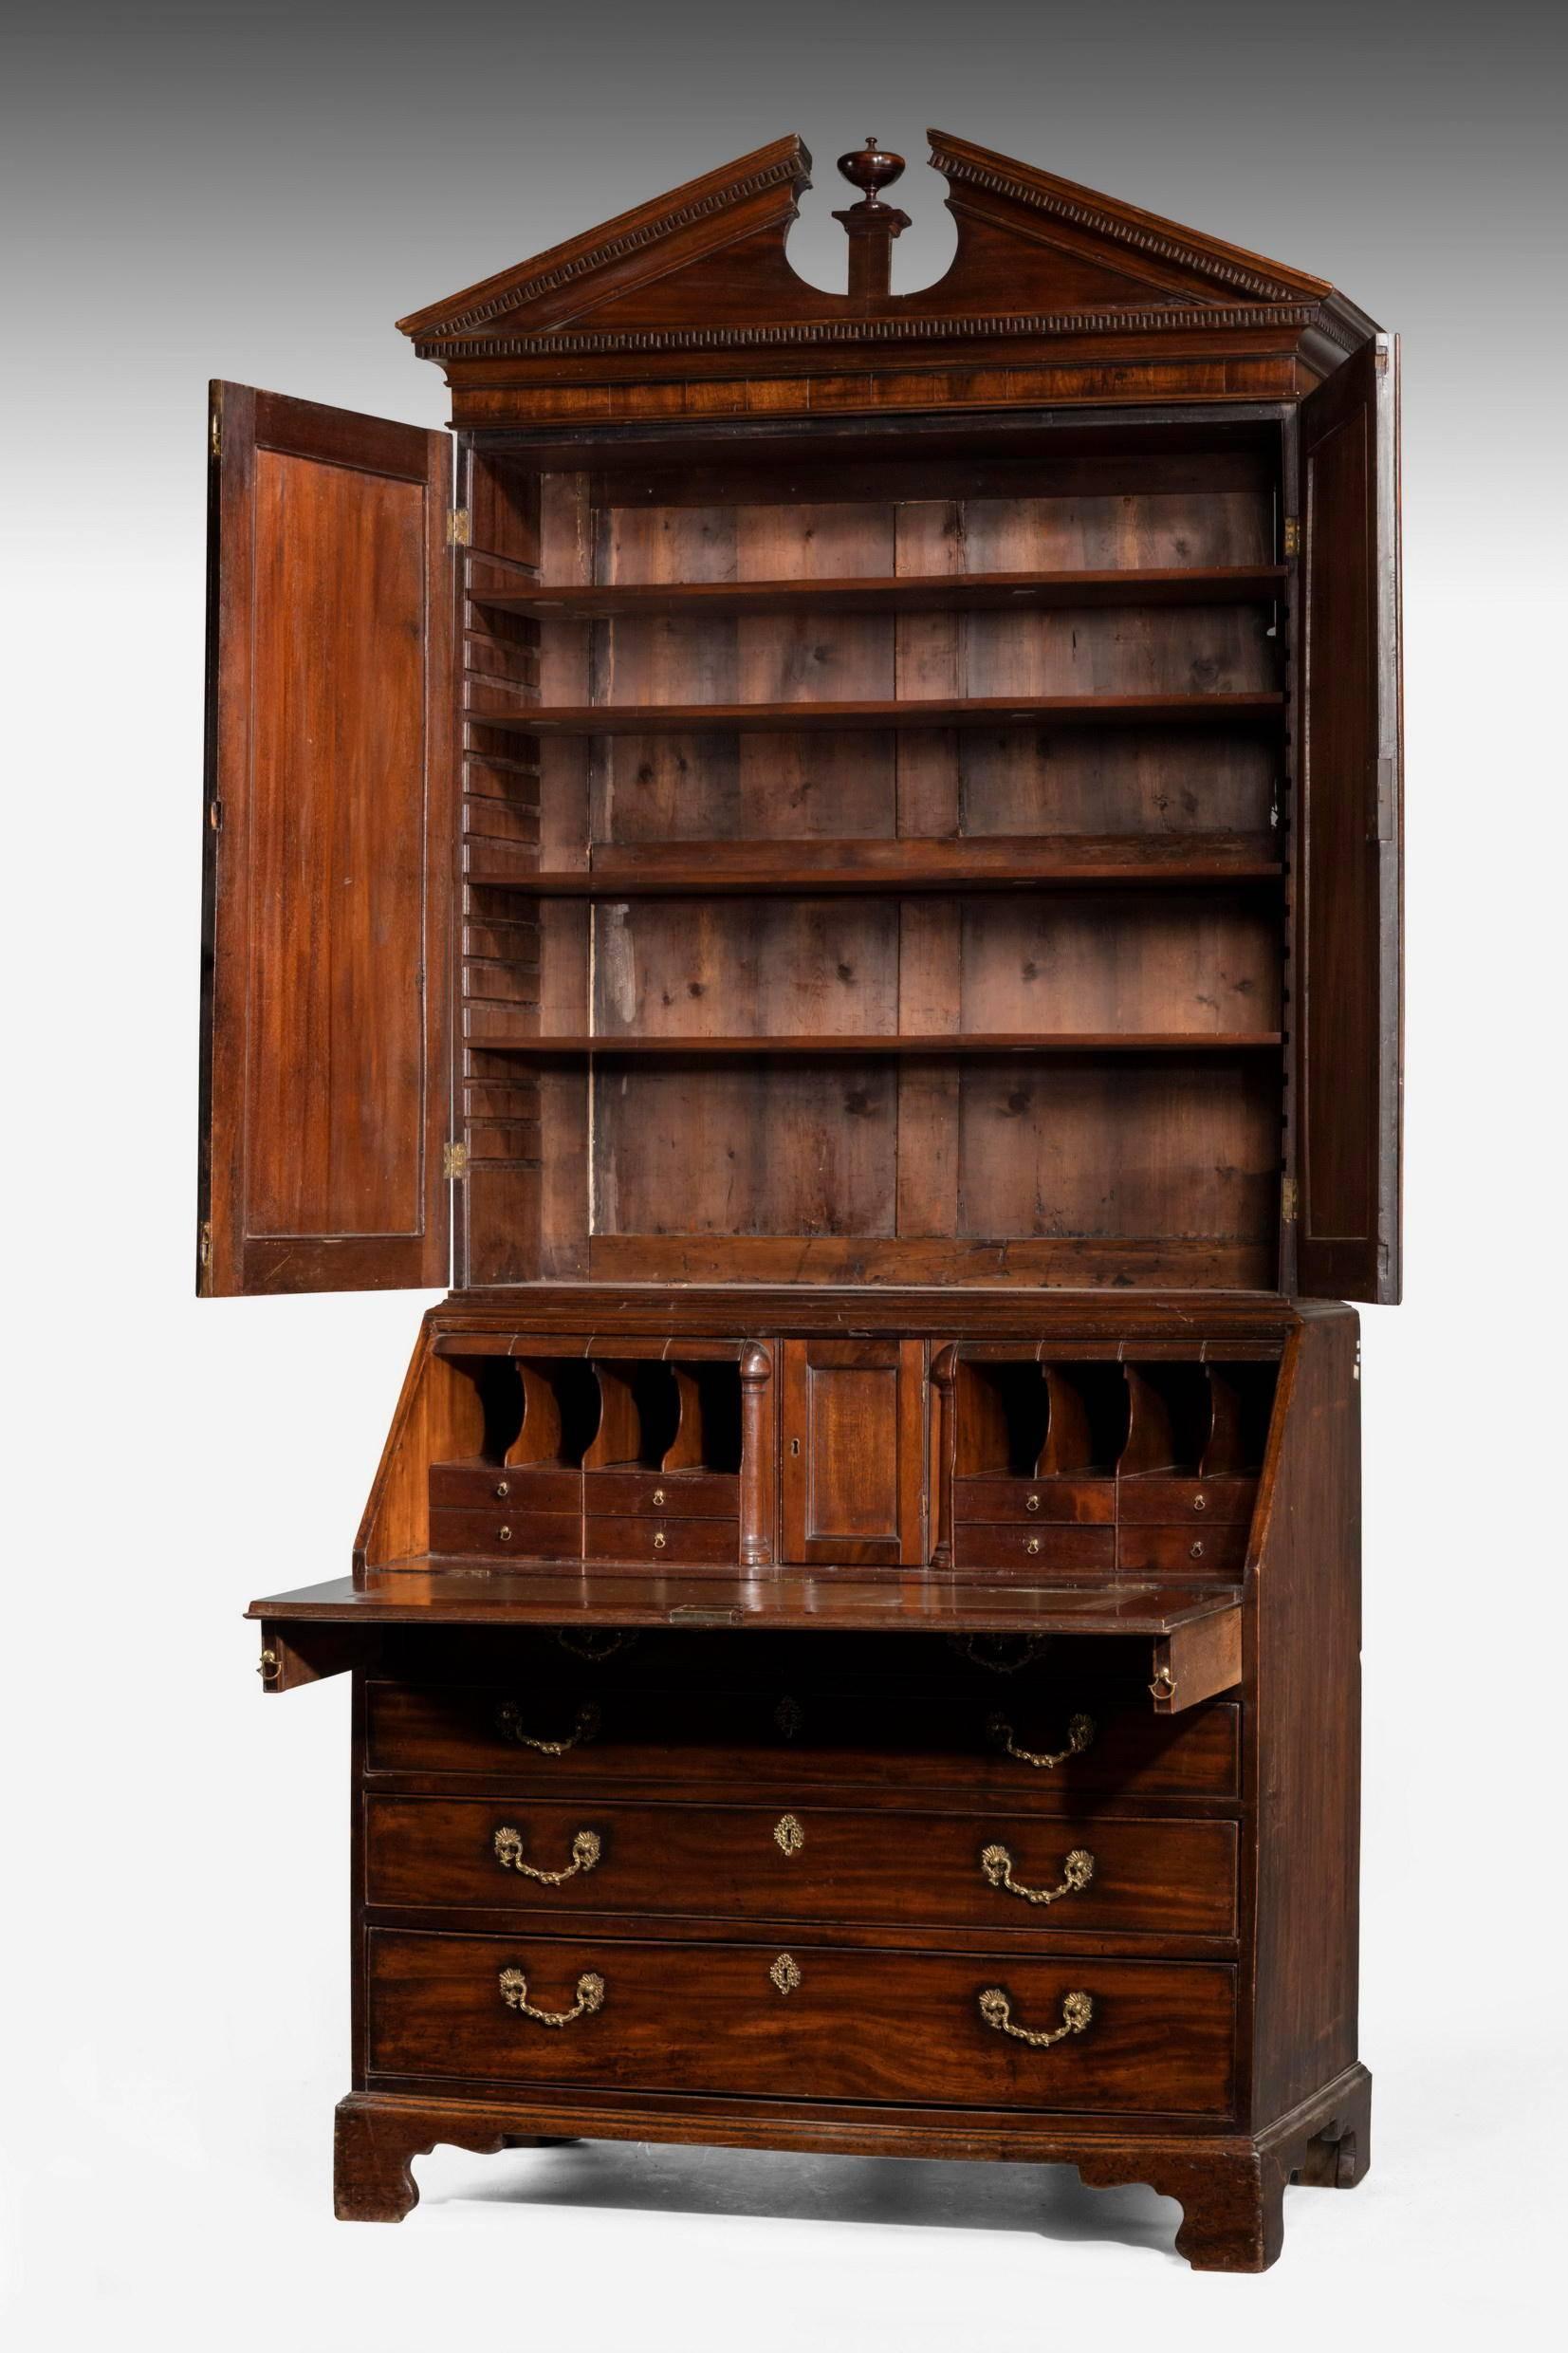 Late 18th Century Mahogany Bureau Bookcase In Good Condition In Peterborough, Northamptonshire